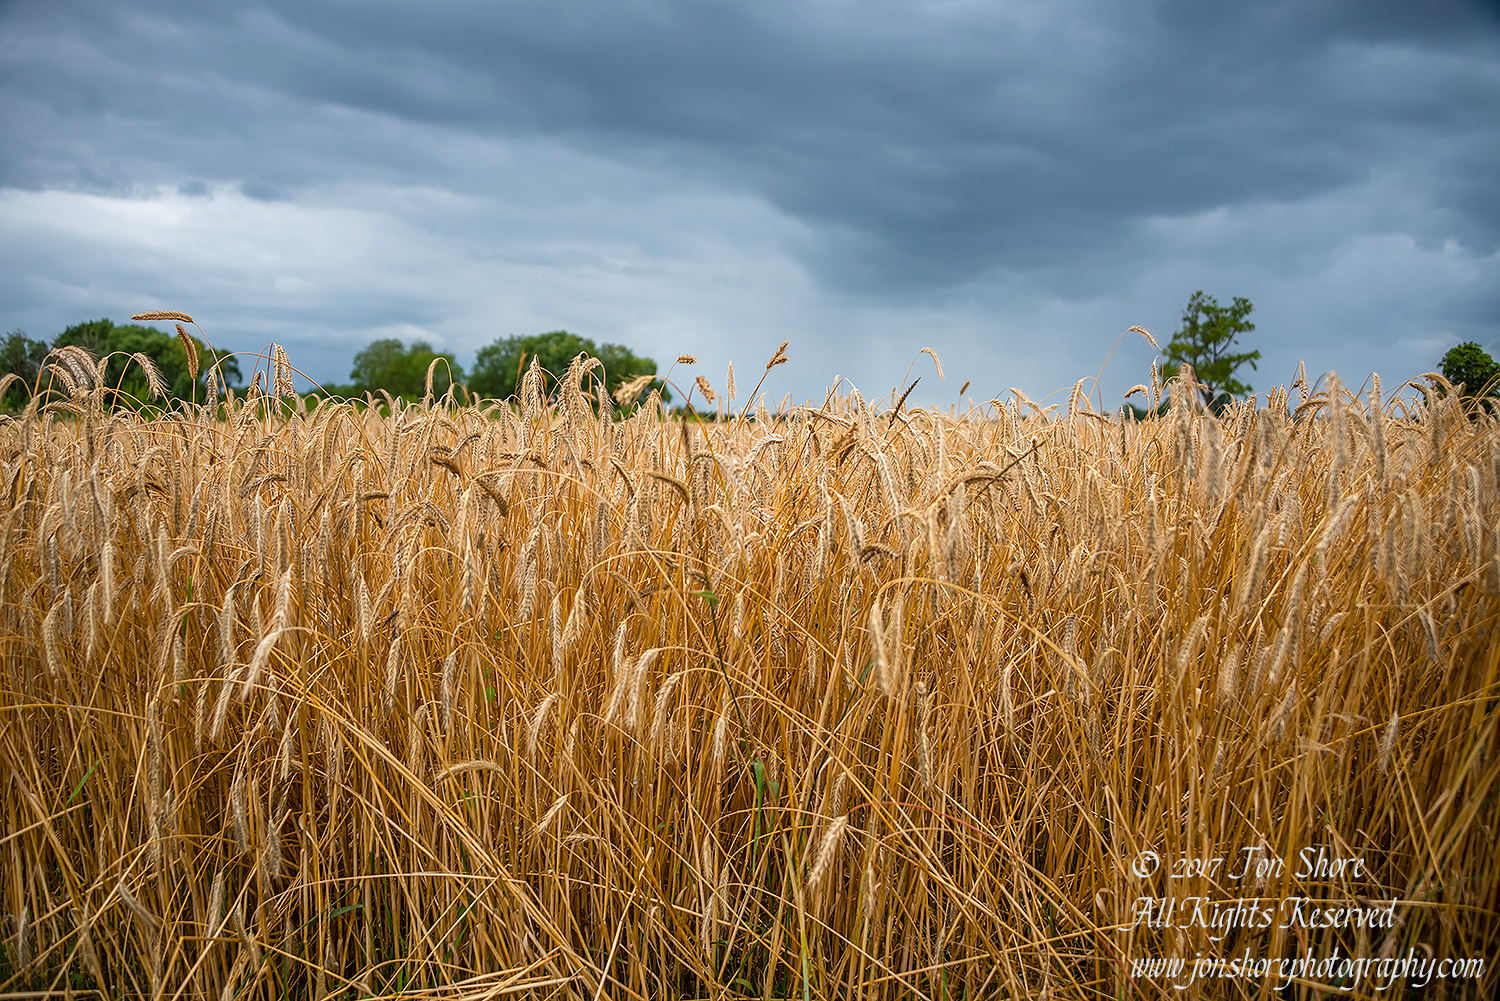 Wheat and clouds